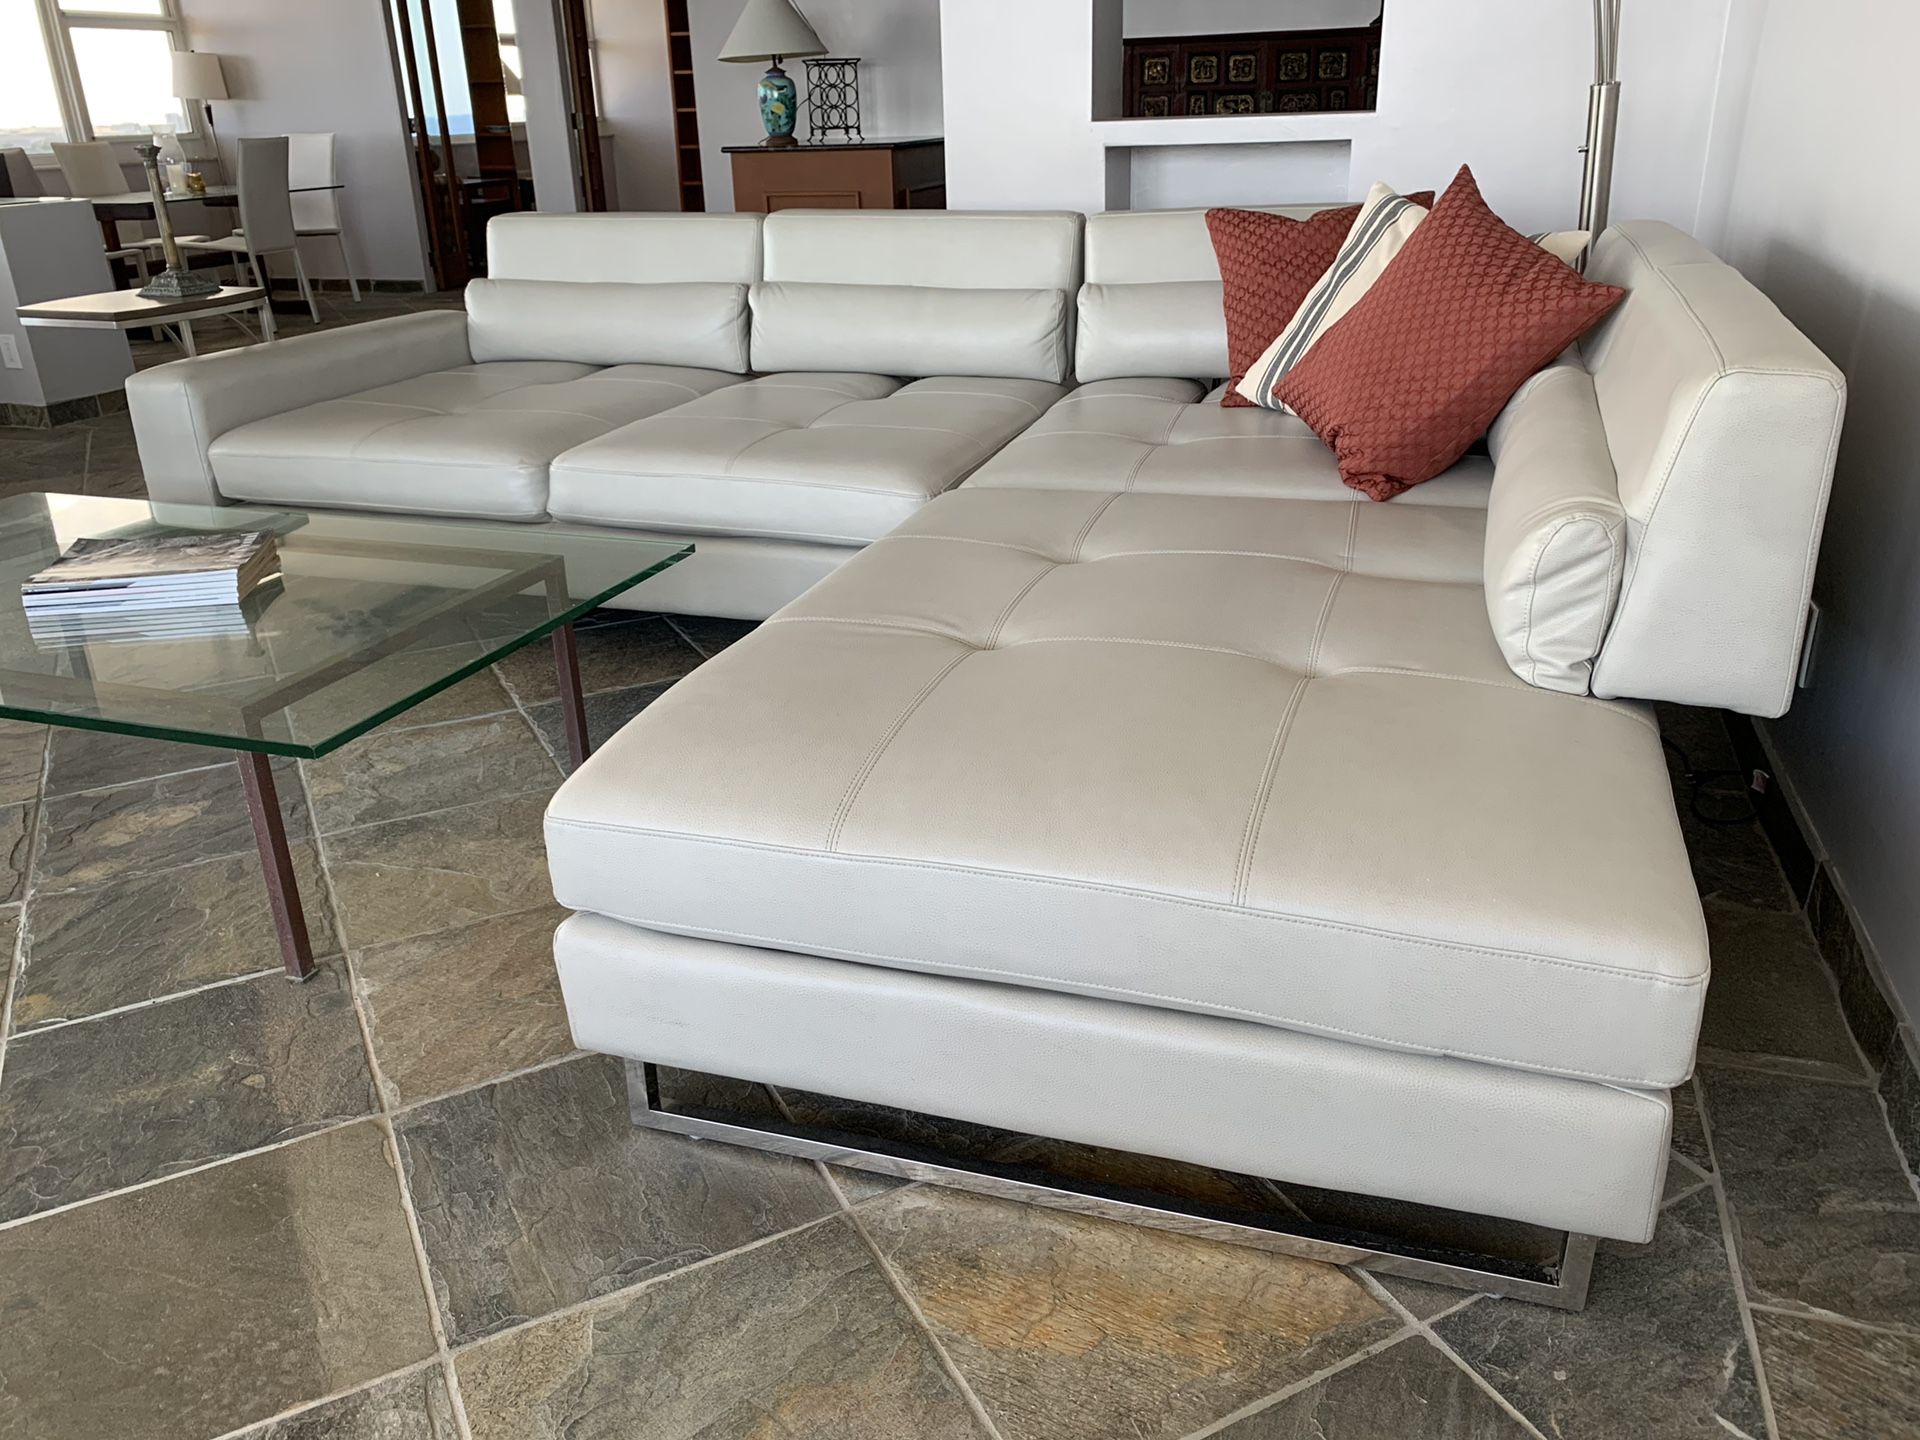 Large modern leather style sectional with adjustable back rests